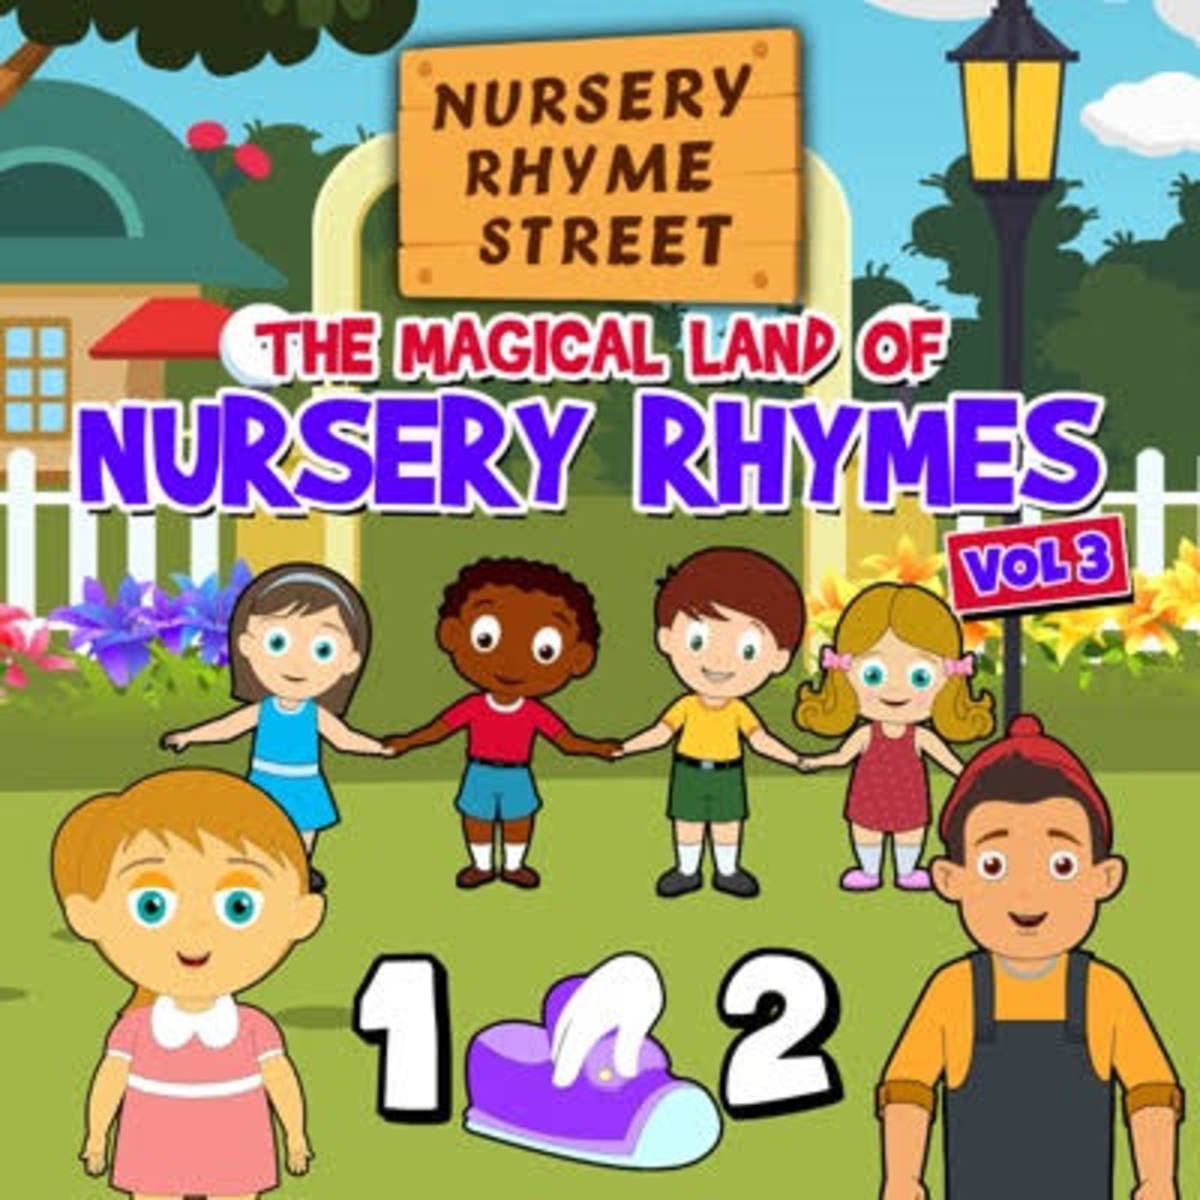 How Do Nursery Rhymes Help Your Child?